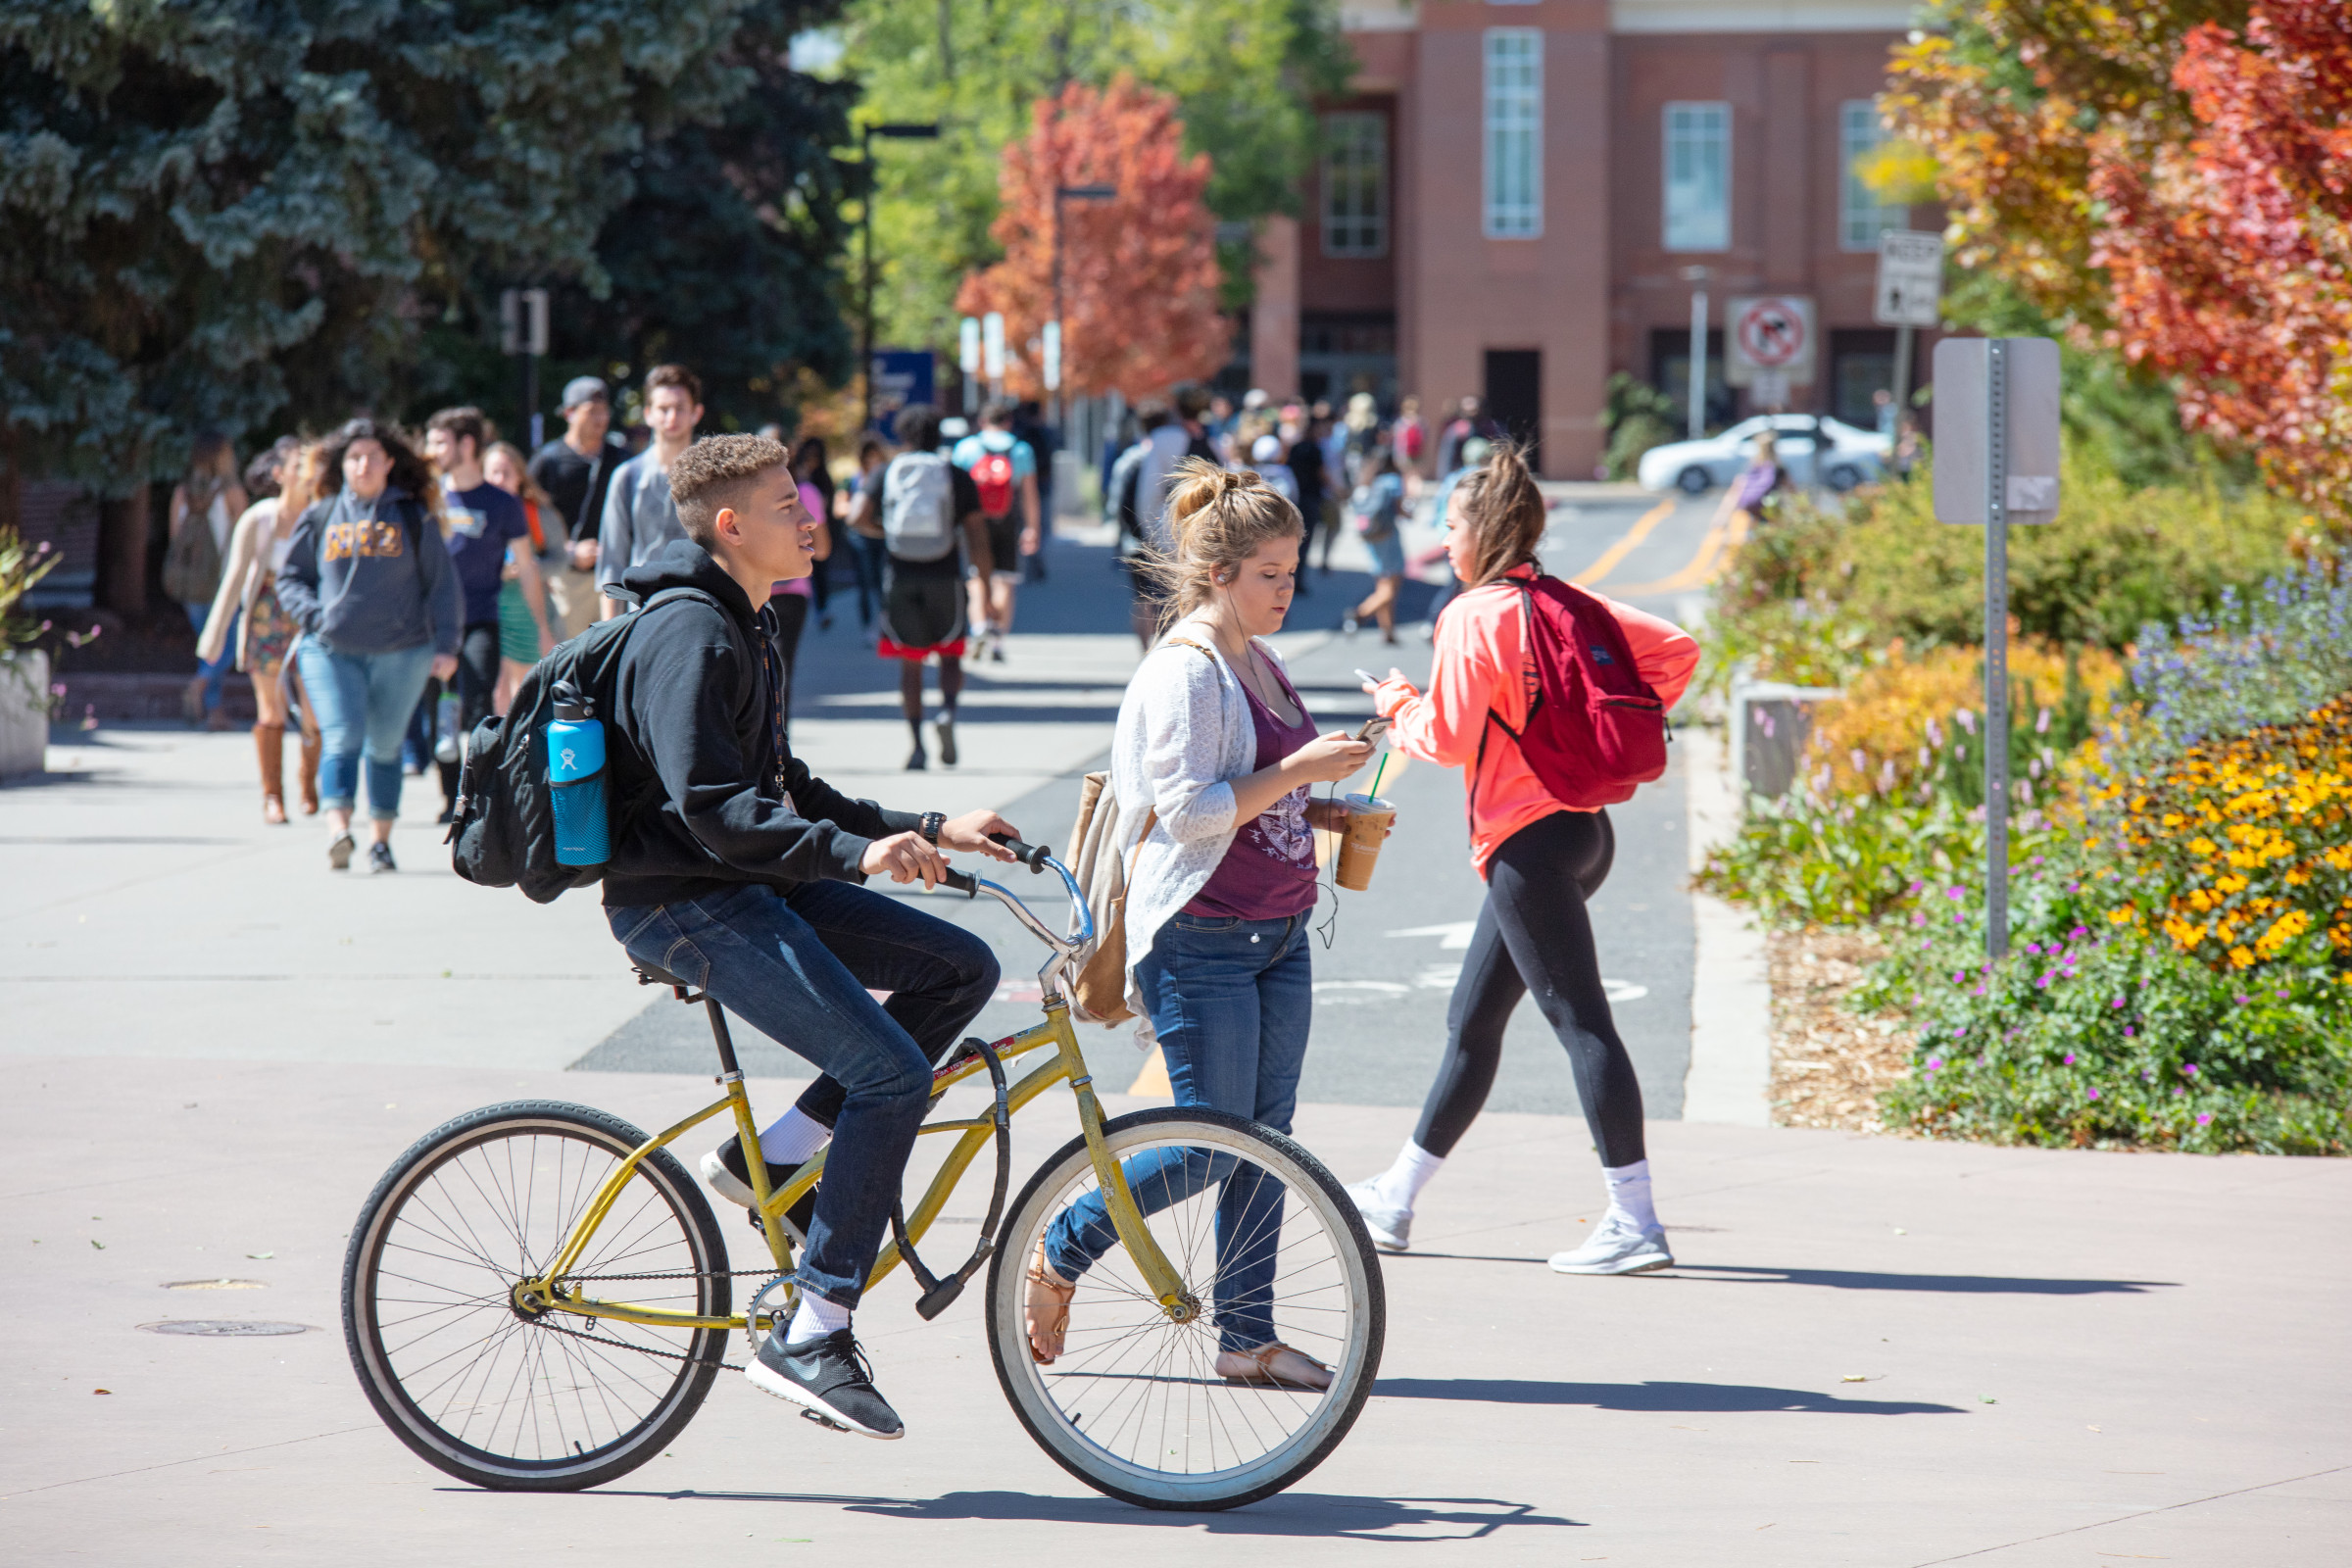 Students walking and biking to and from class on campus.